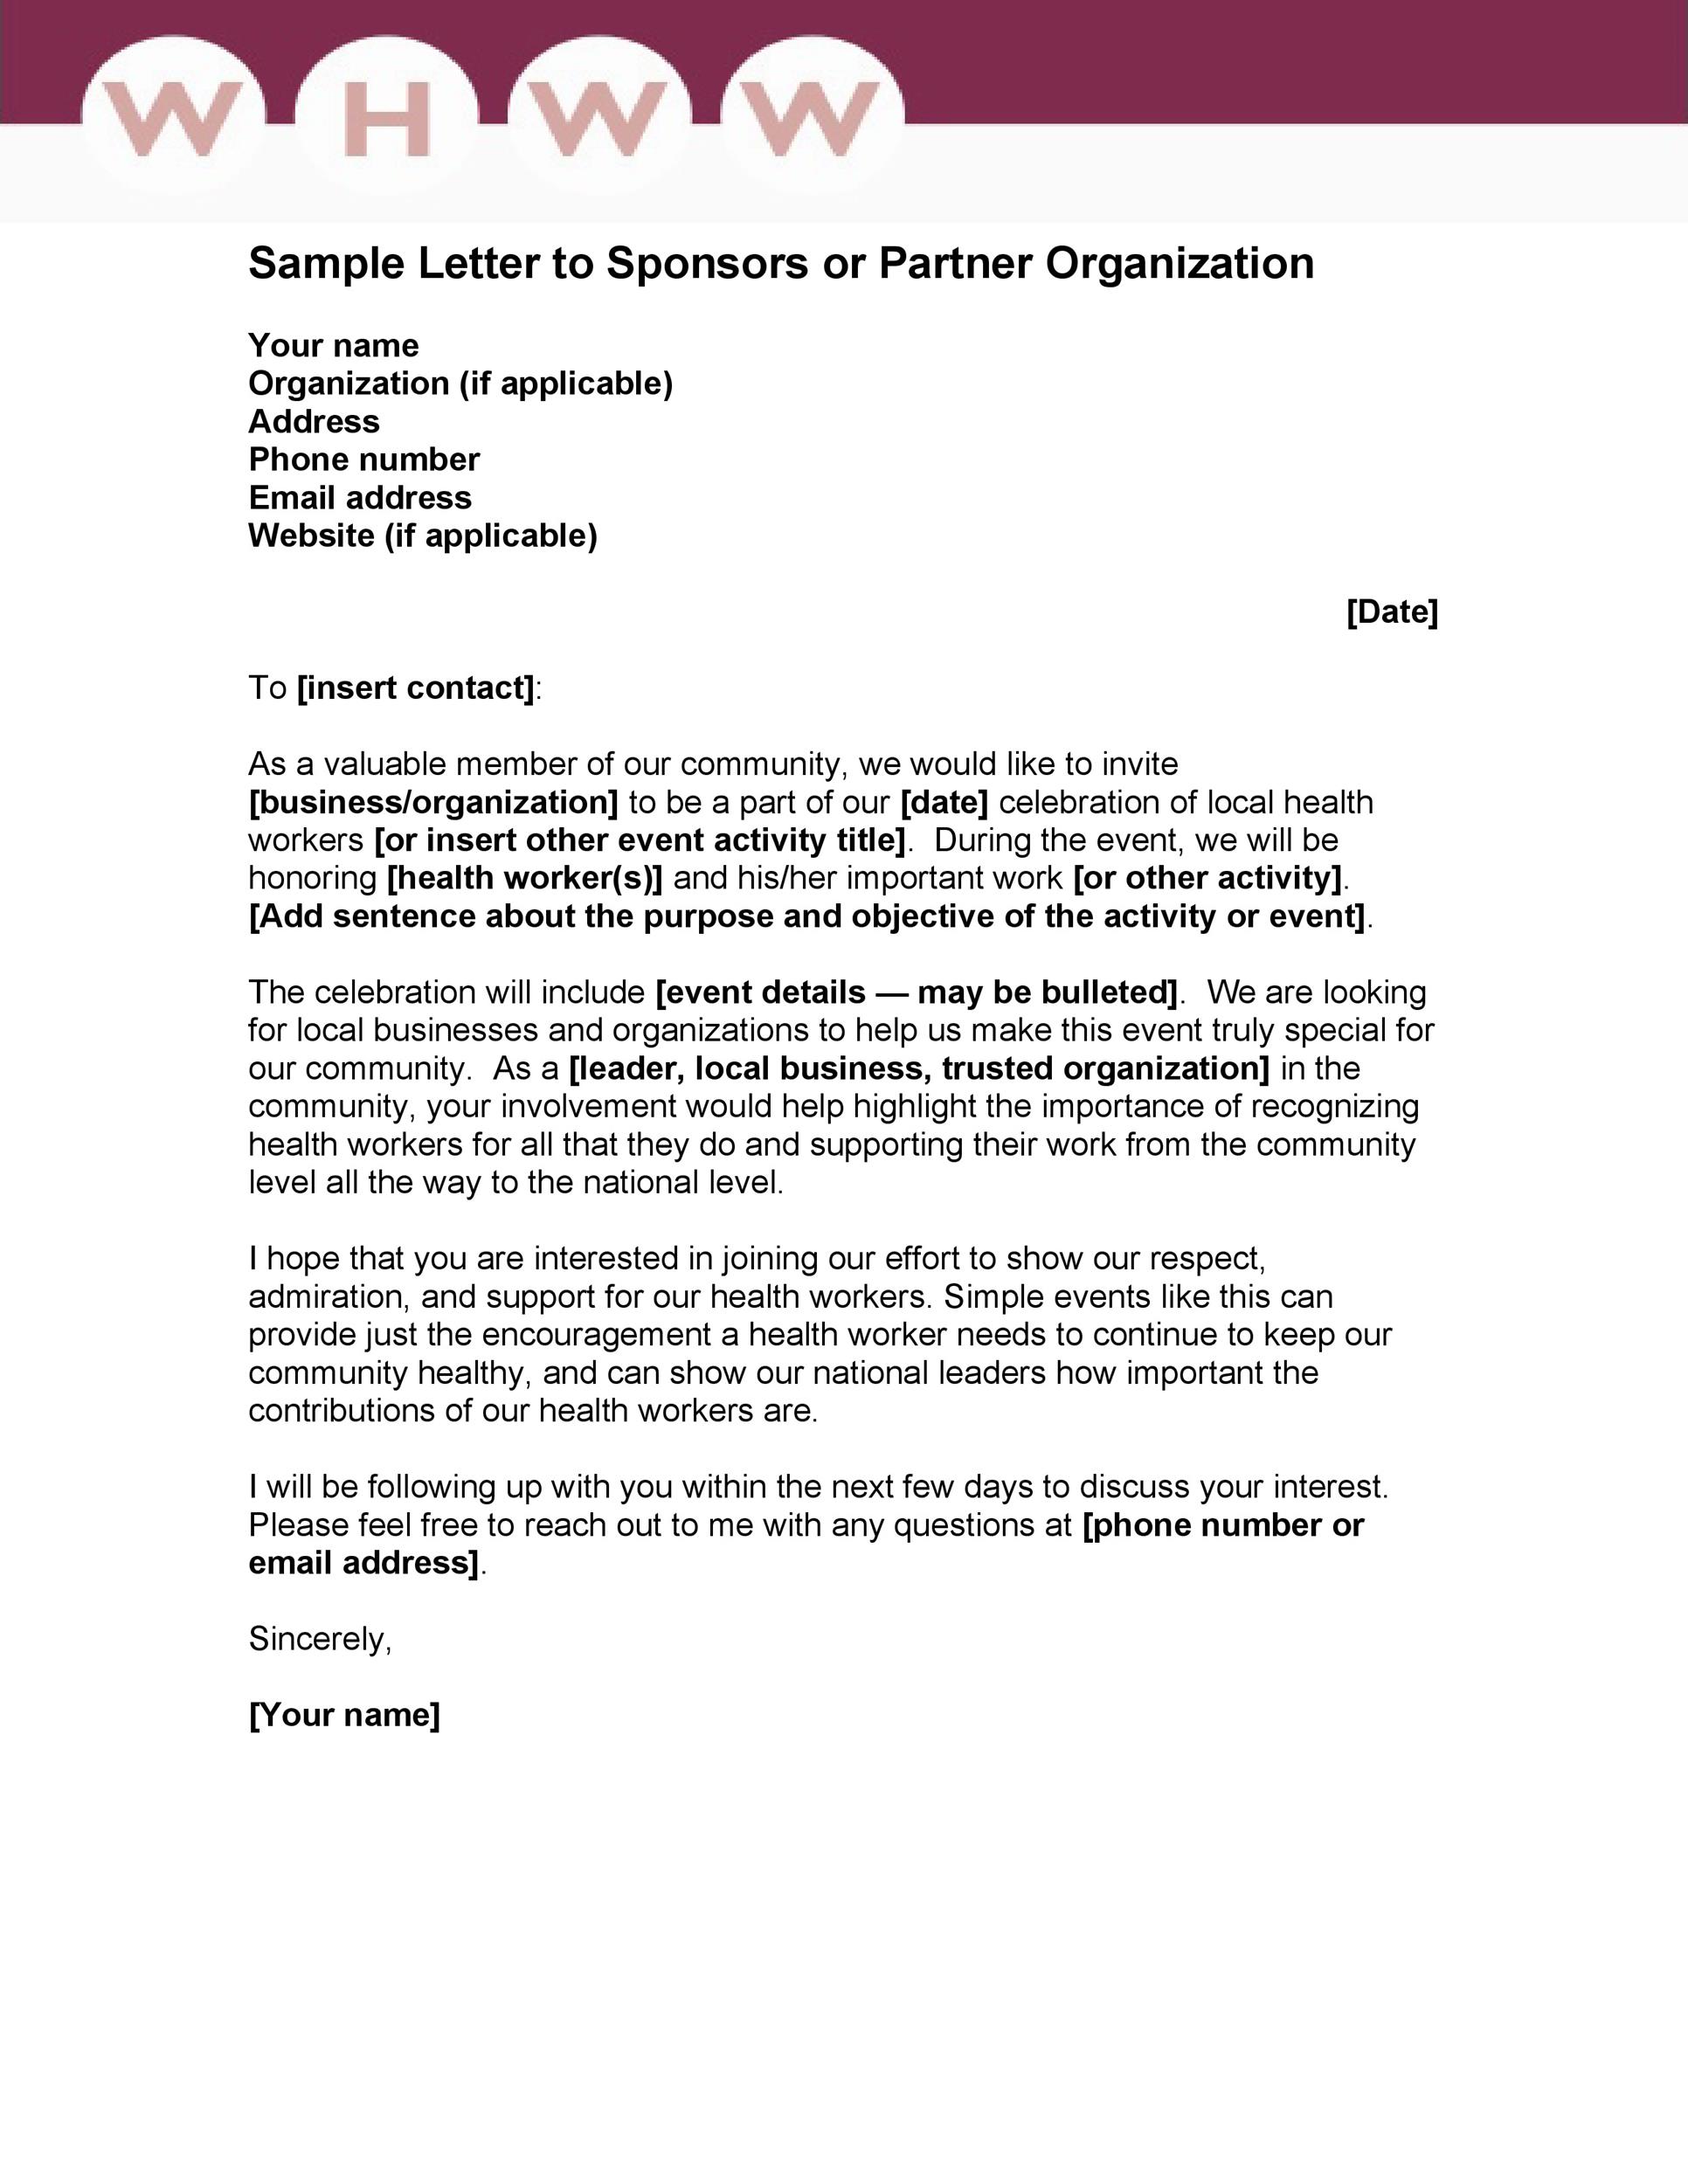 Why You Should Never Write a Sponsorship Letter of Request